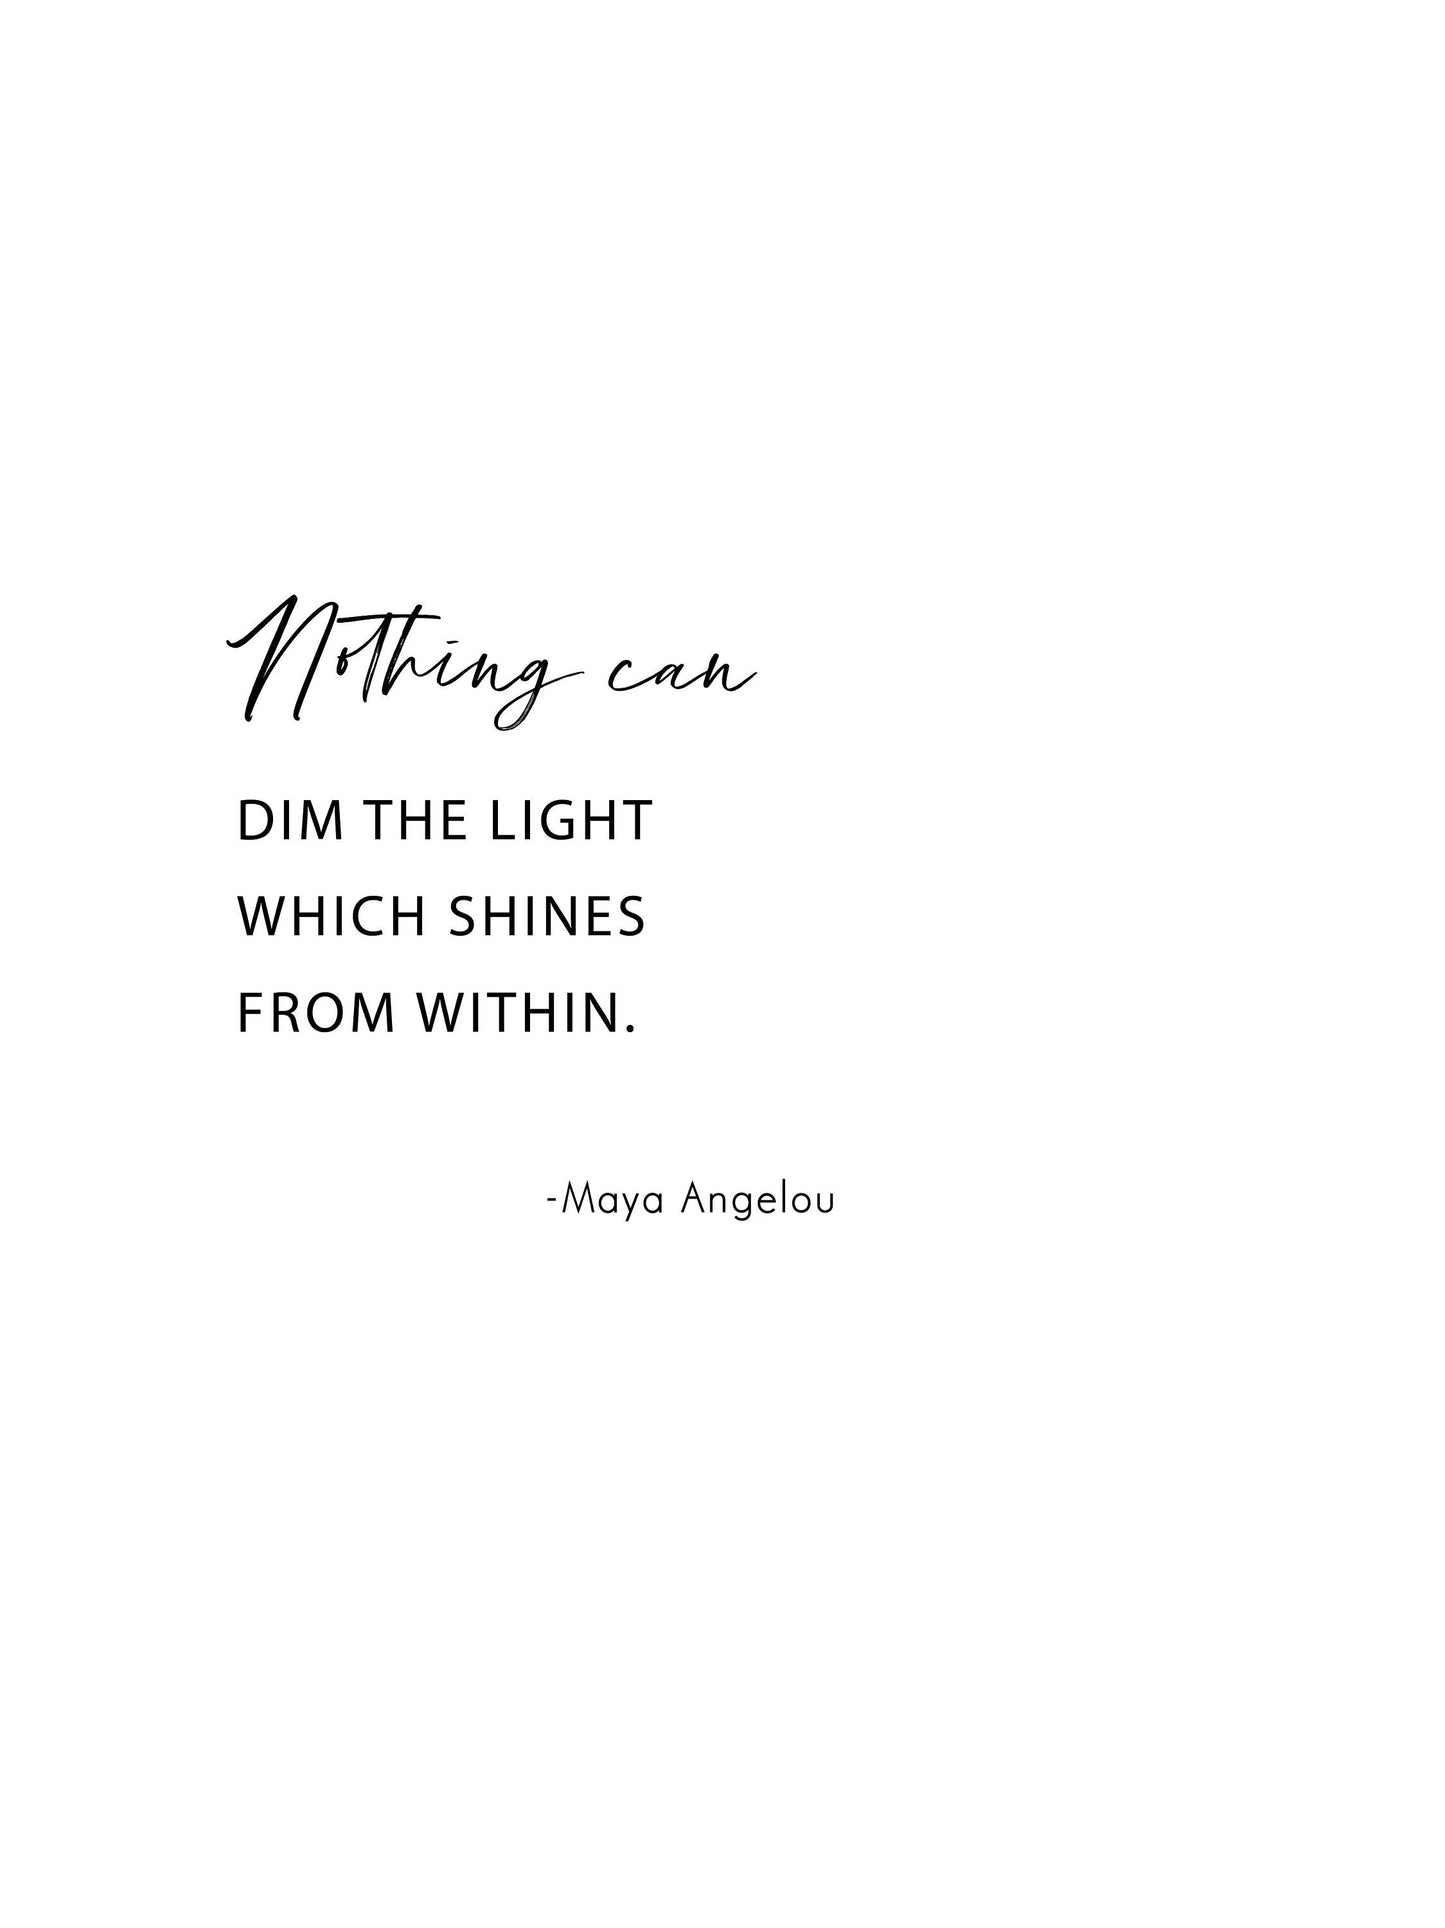 Nothing can dim the light which shines from within,Maya Angelou quote,Inspirational print,Wall decor,Maya Angelou print,Positive office